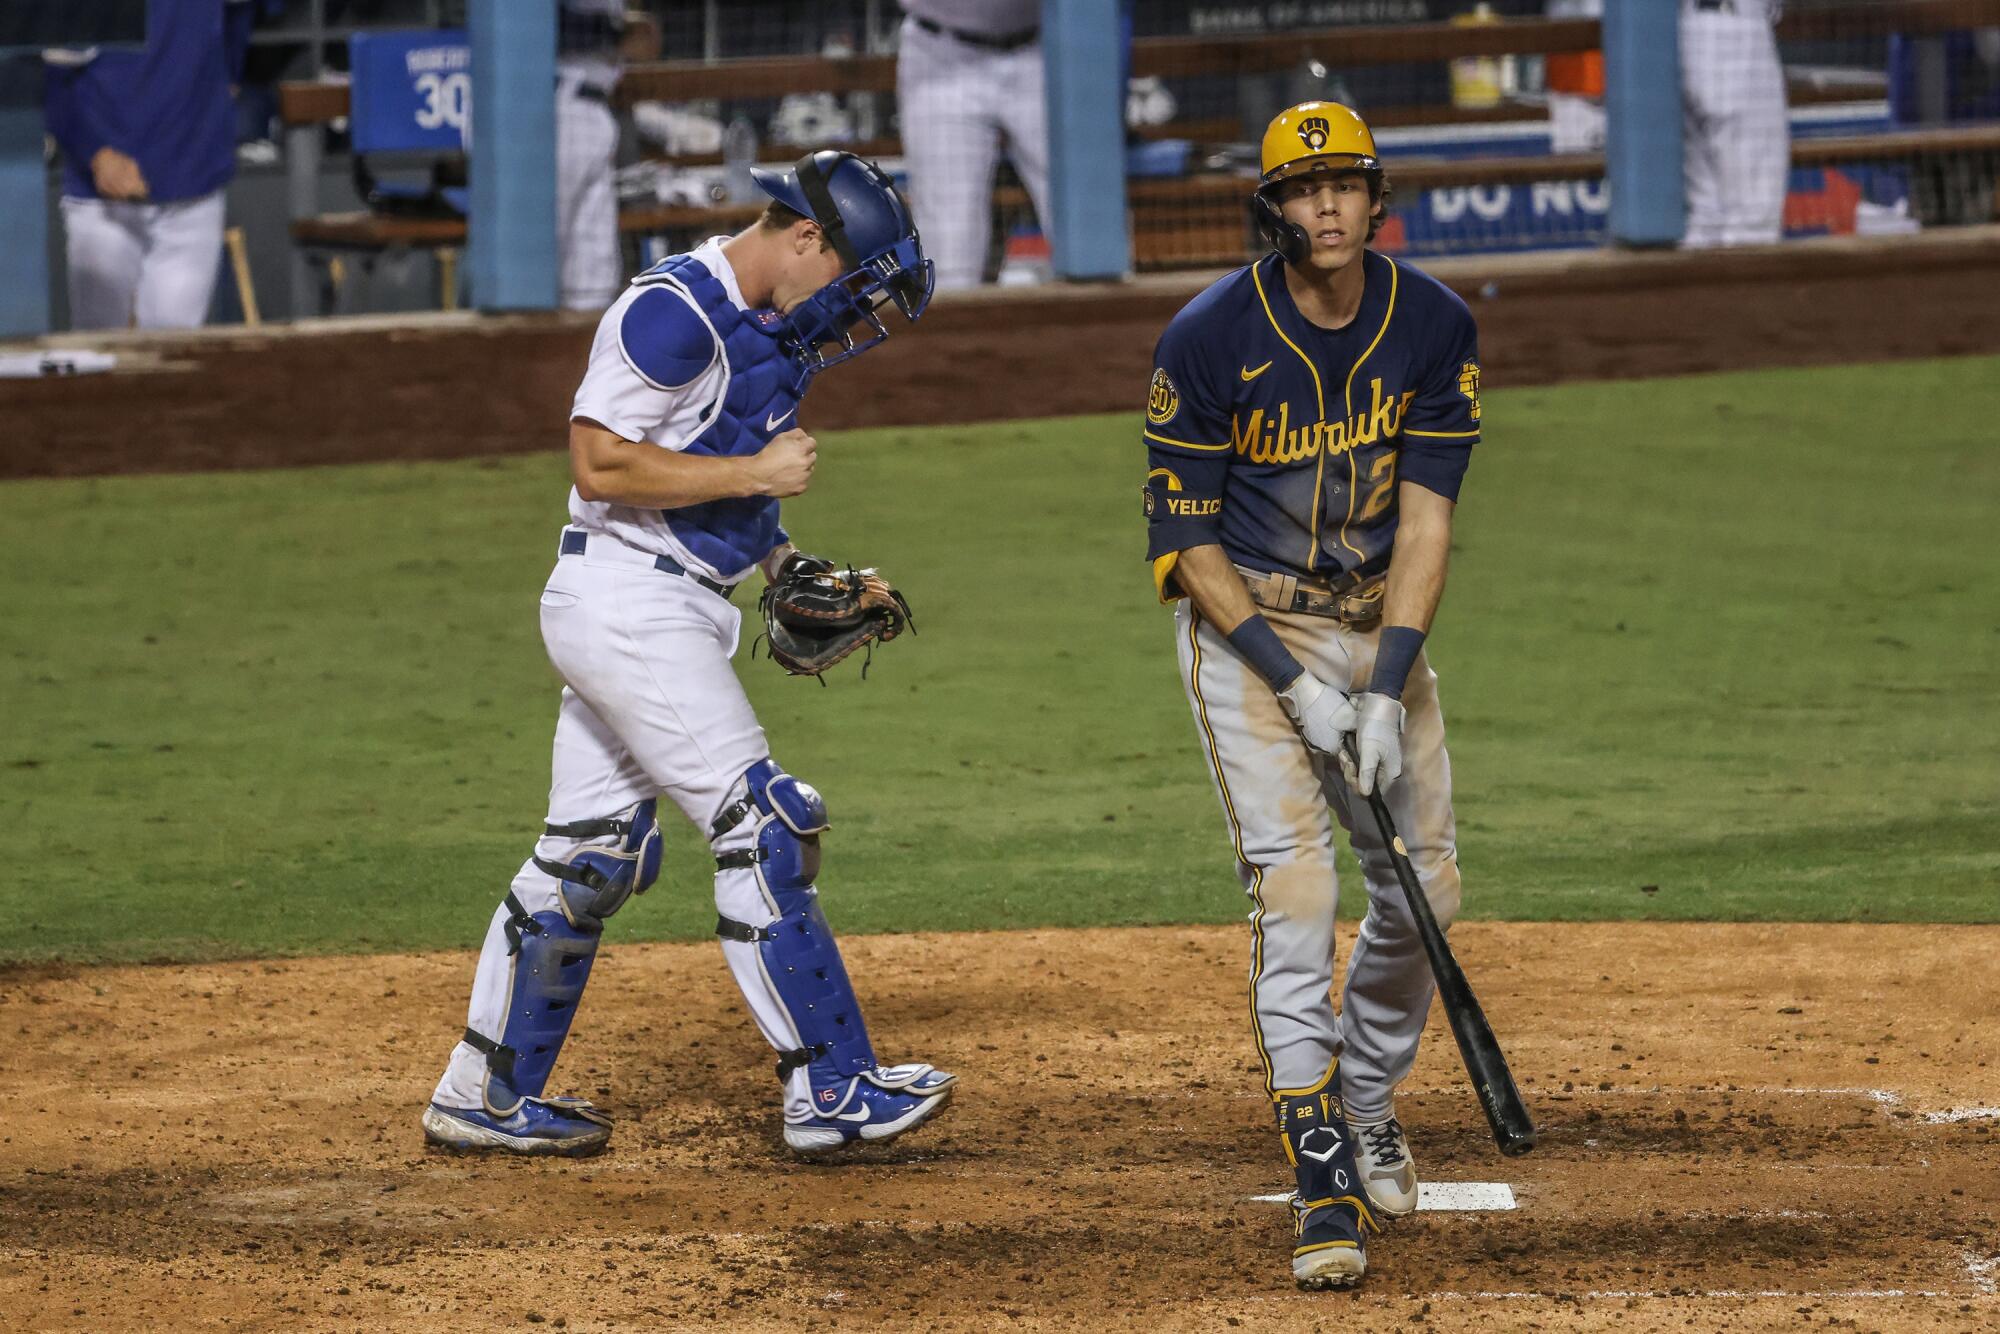 Milwaukee Brewers right fielder Christian Yelich shows his frustration after striking out.